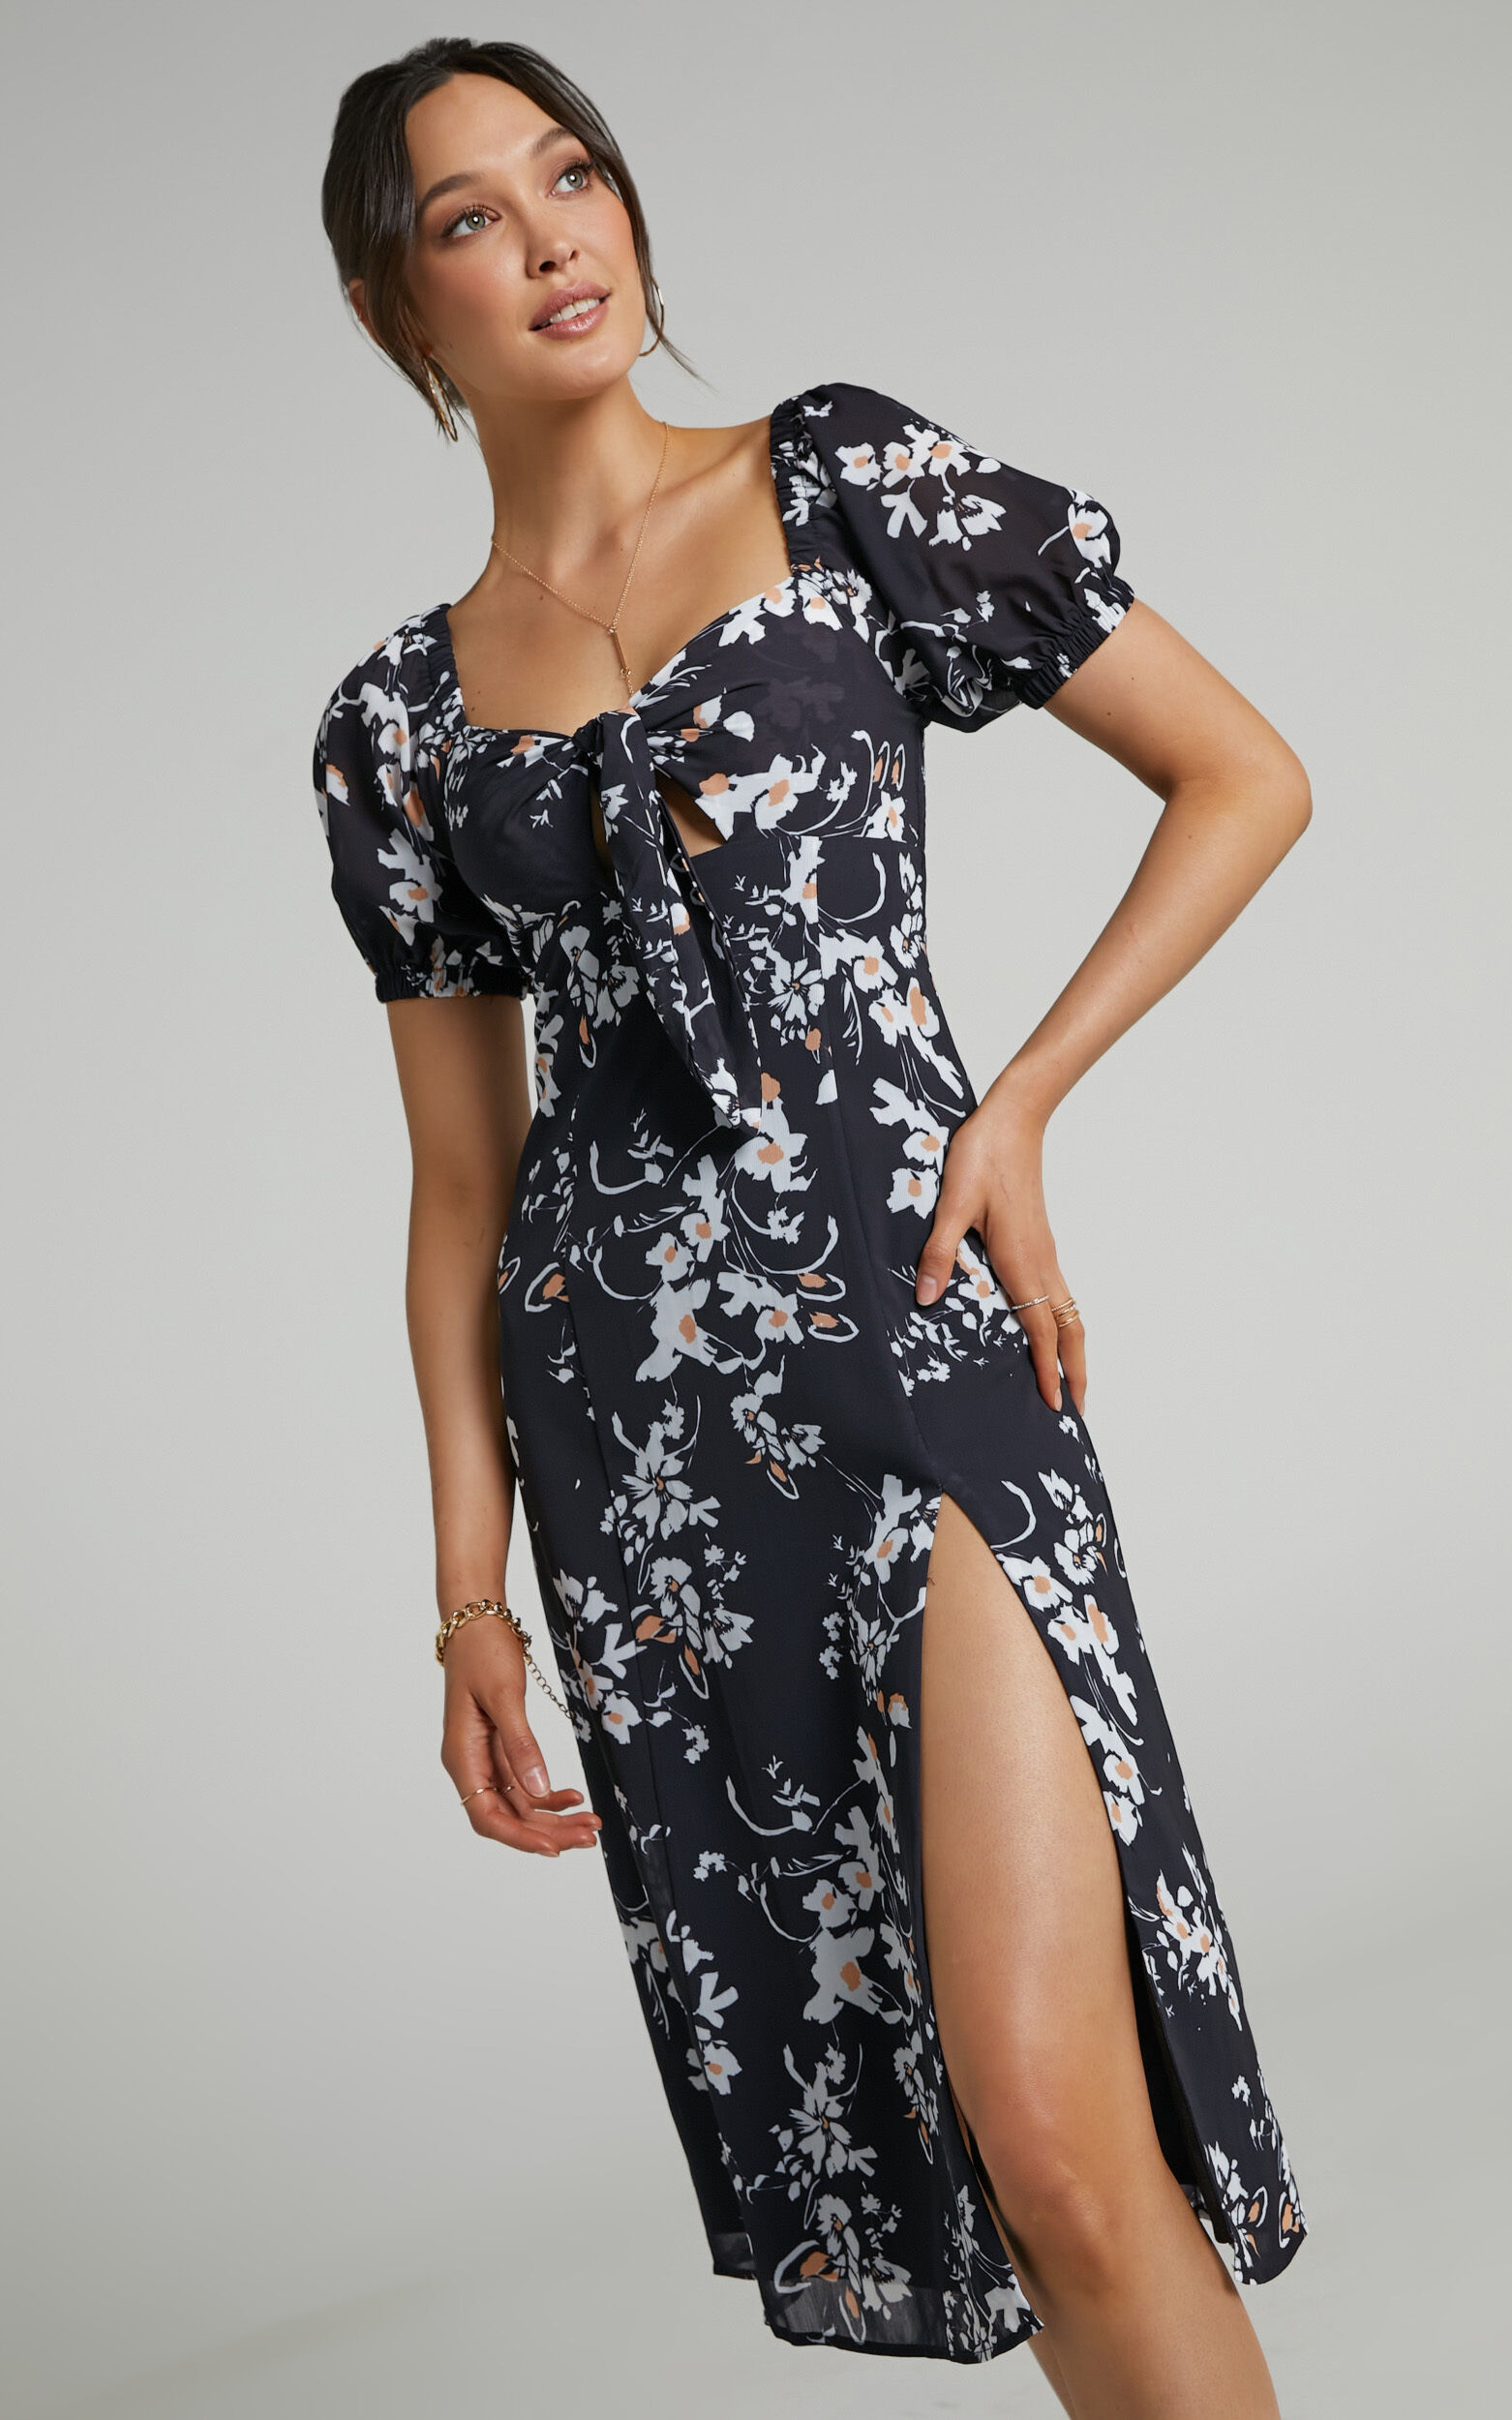 Cyia Tie Bust Midi Dress with Leg Slit in Black Floral - 04, BLK2, super-hi-res image number null